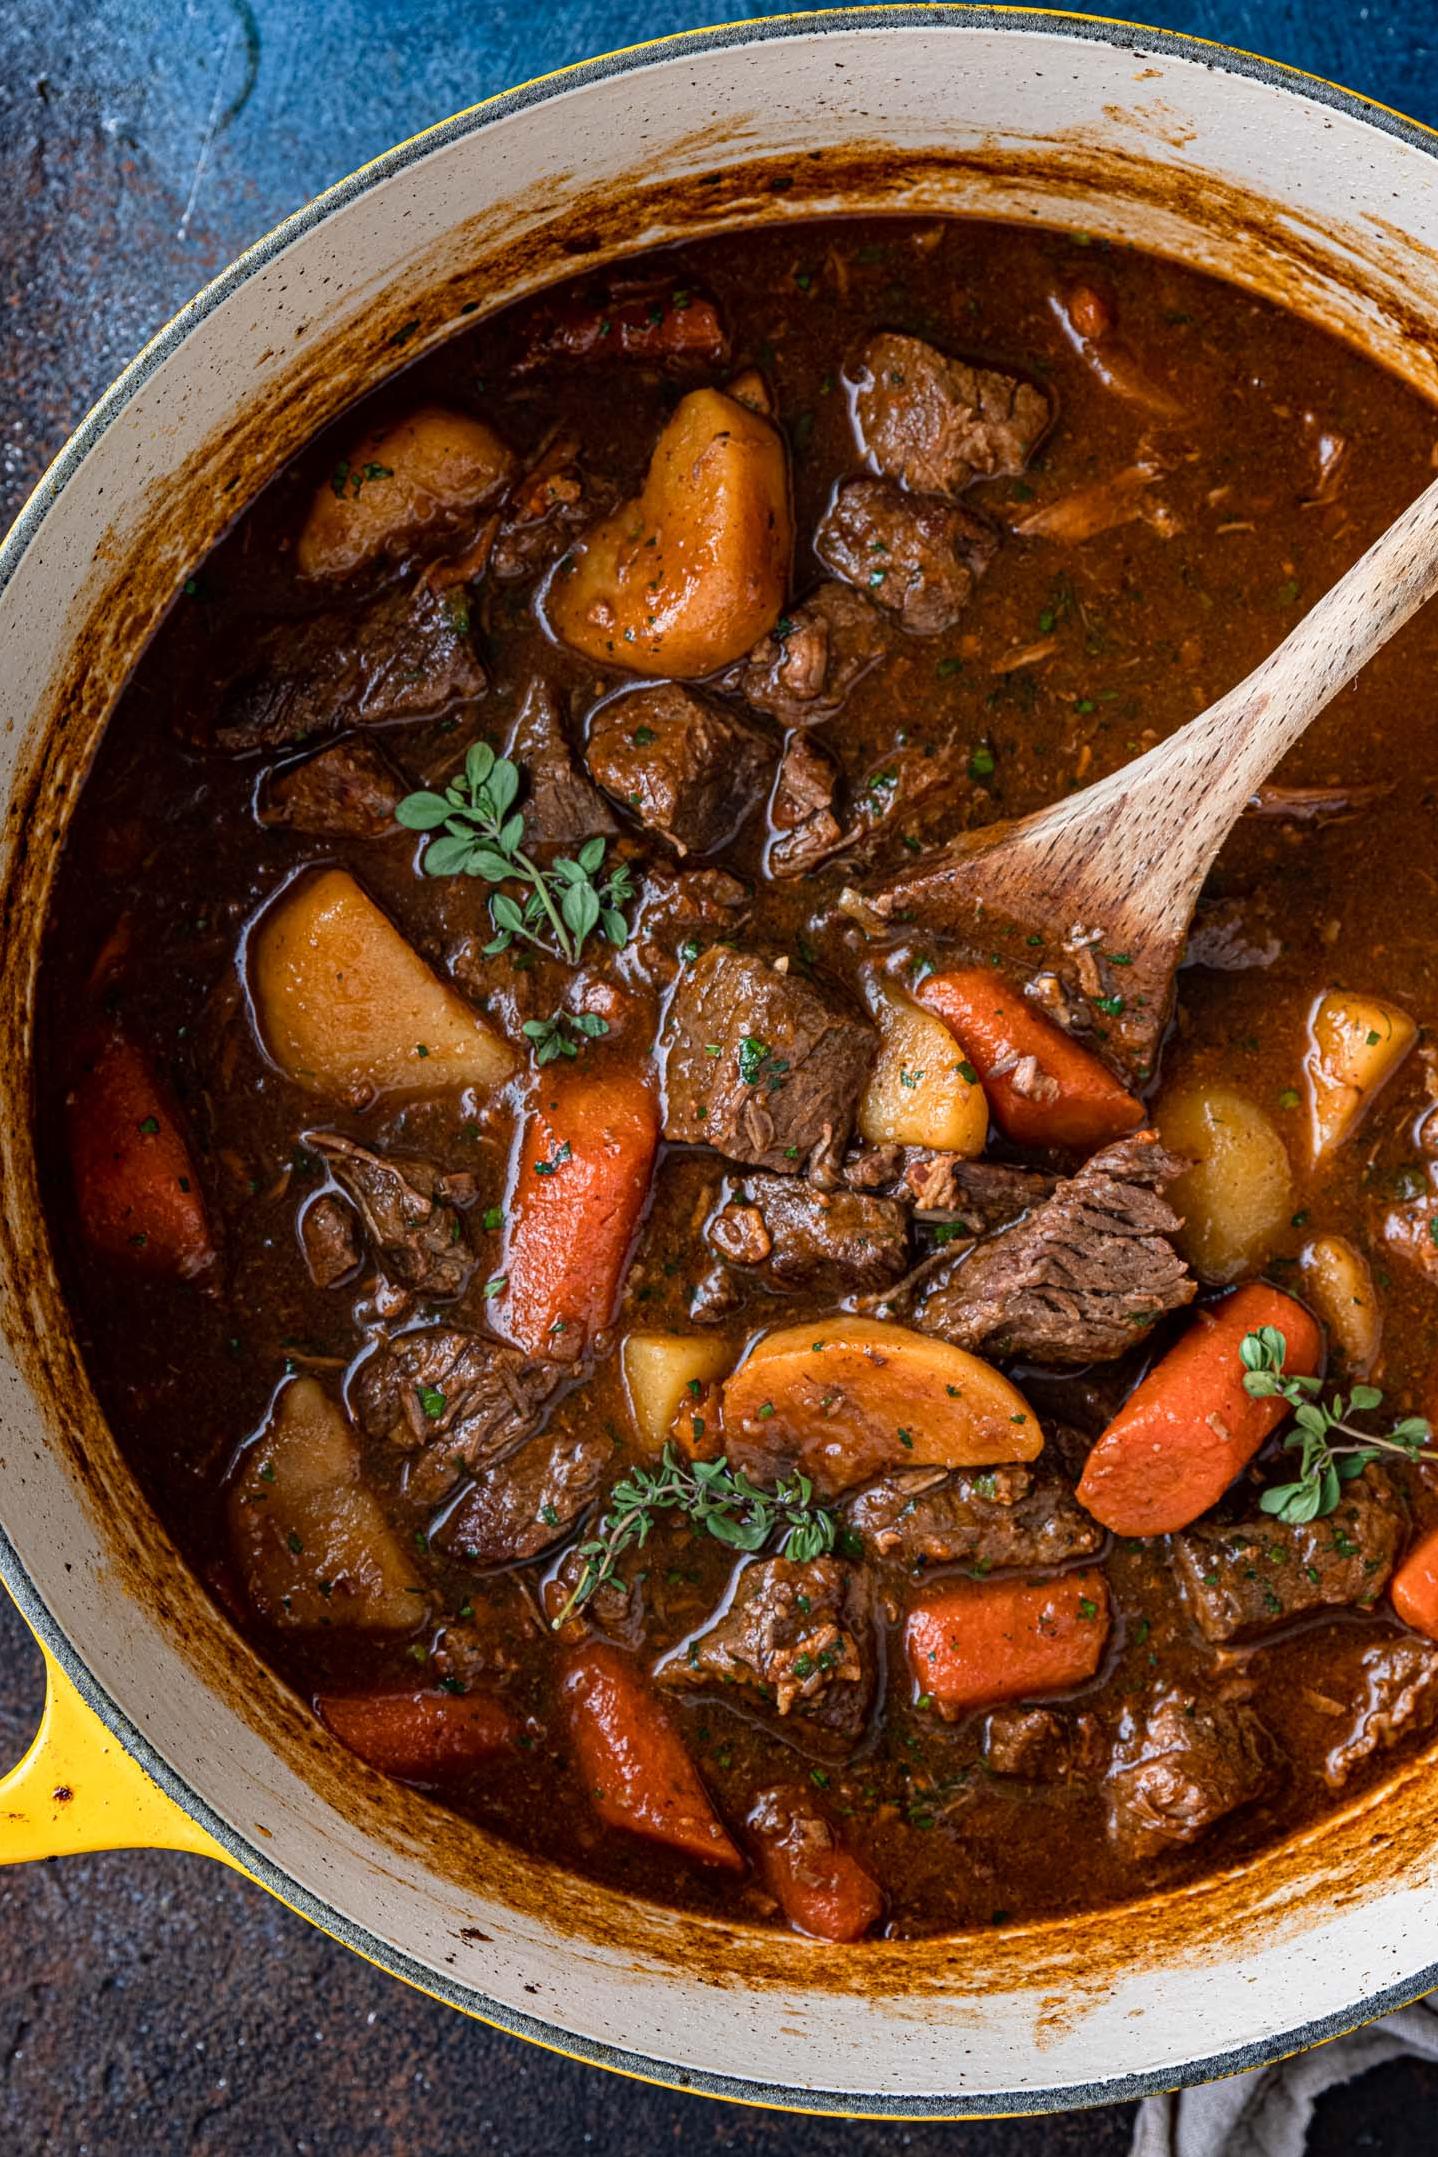  A warm bowl of beef stew, perfect for a chilly evening